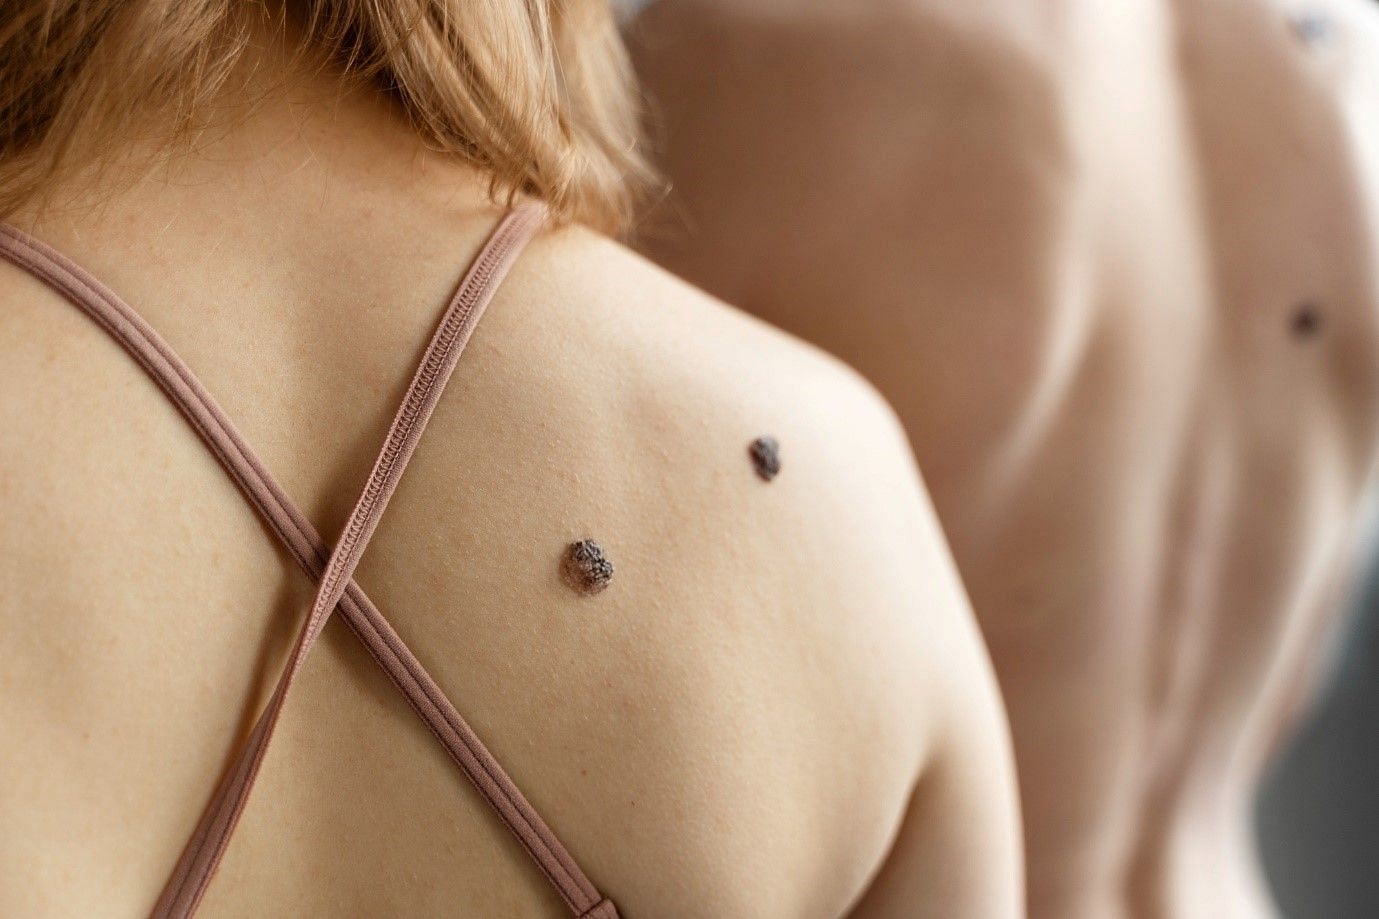 Skin Tags and Moles are the most common skin issues (Image by Freepik on Freepik)